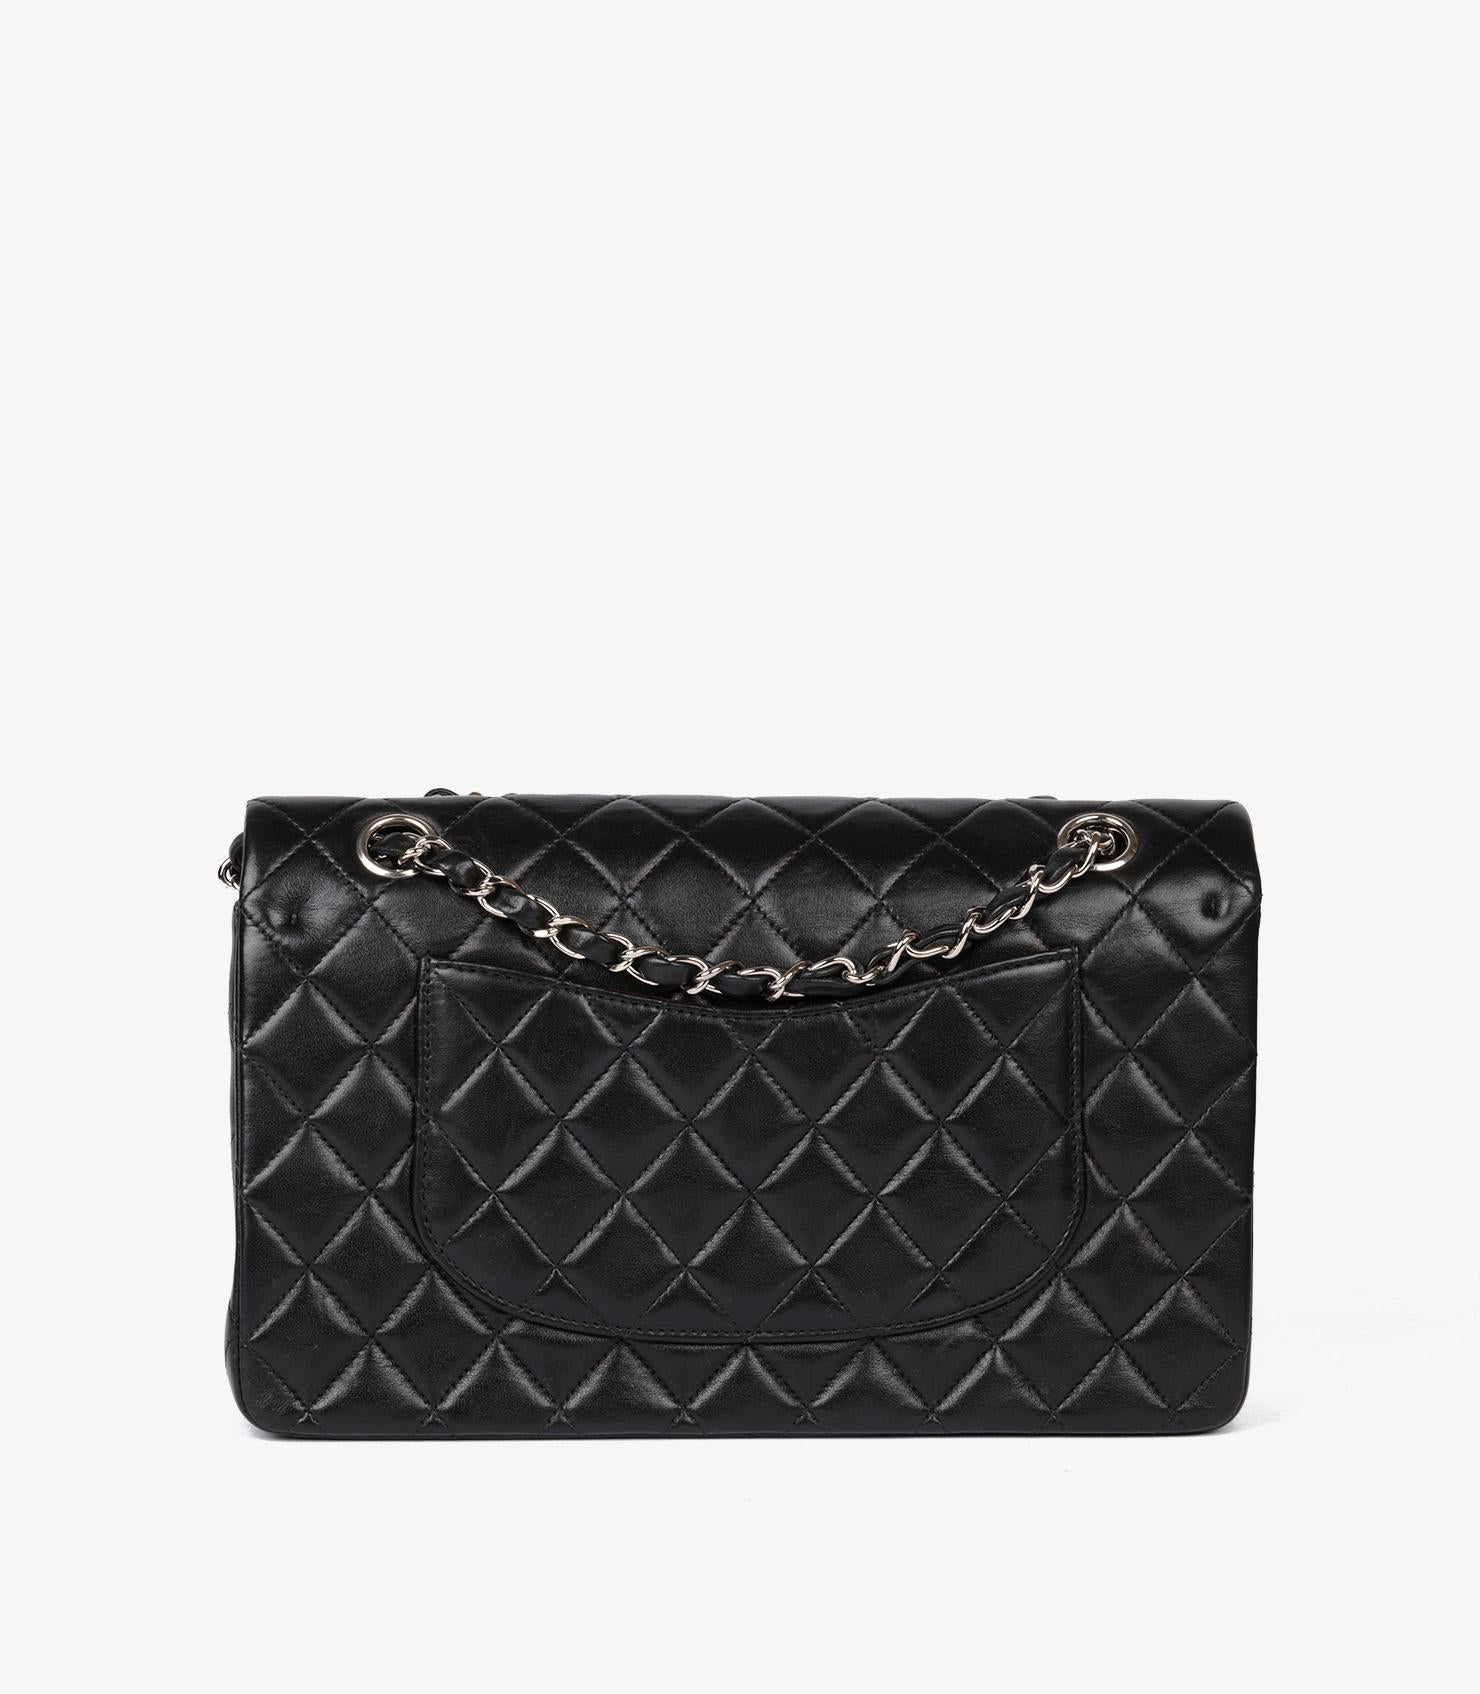 Chanel Black Quilted Lambskin Vintage Medium Classic Double Flap Bag For Sale 8